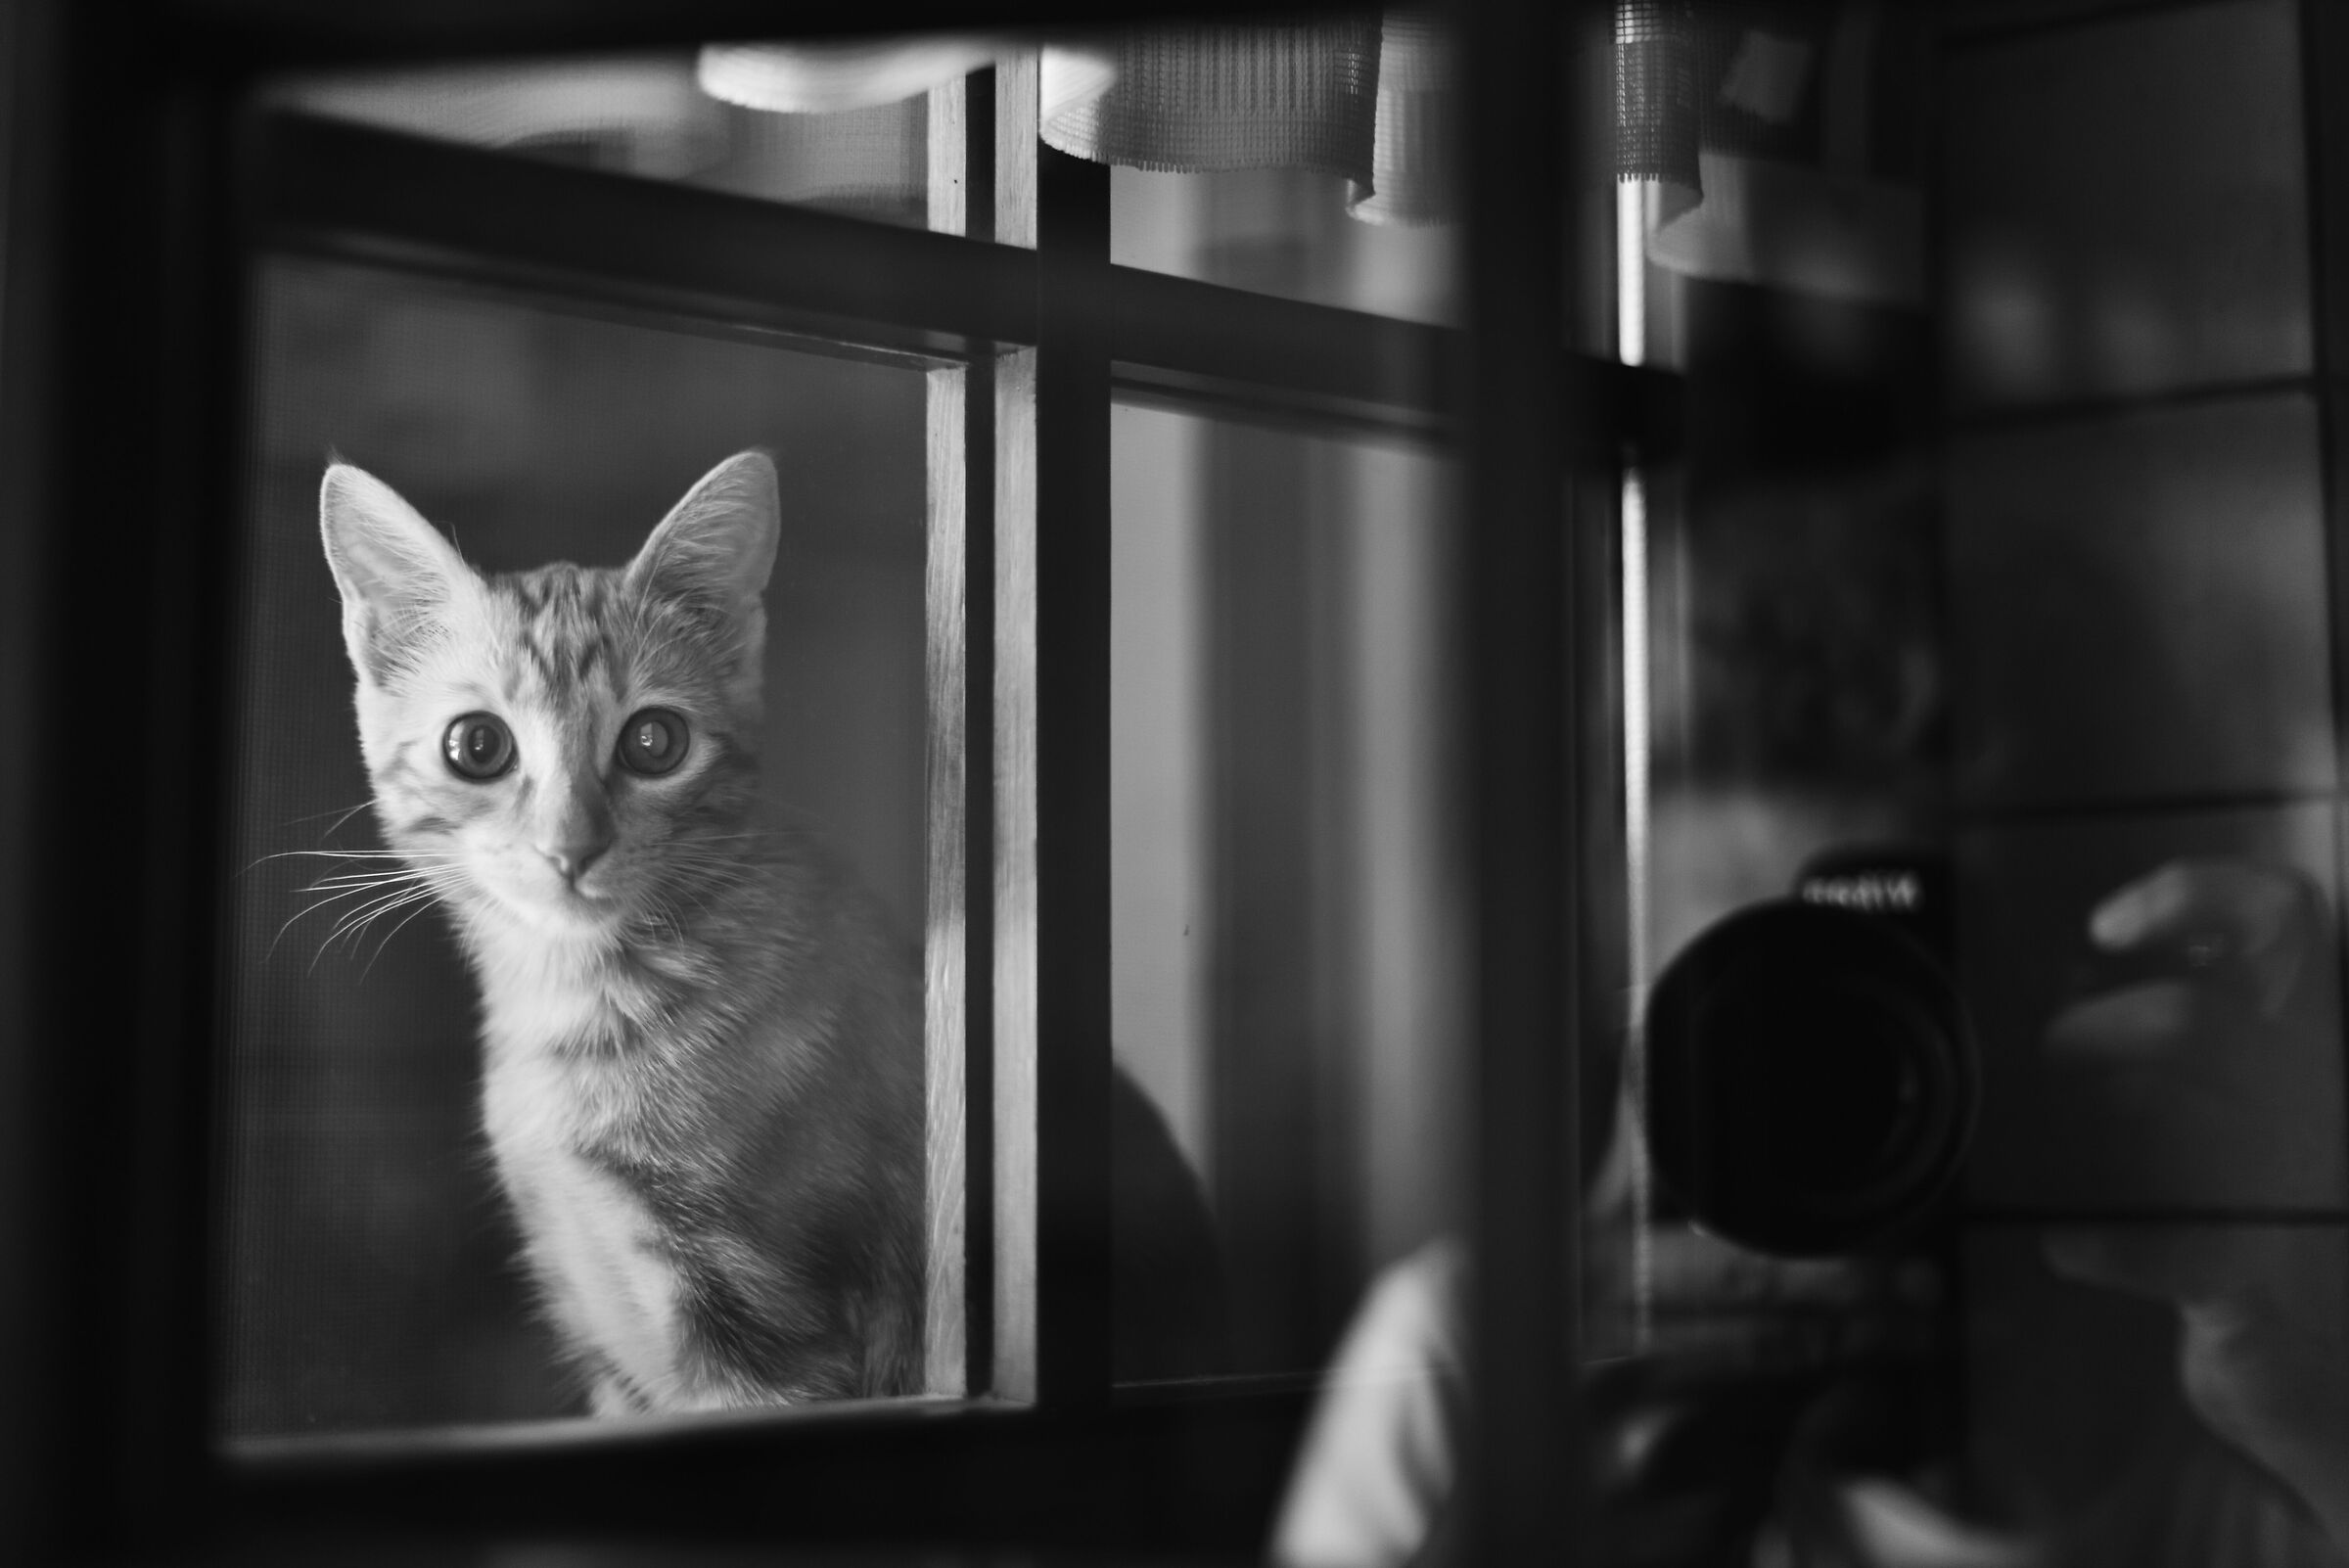 the cat at the window...